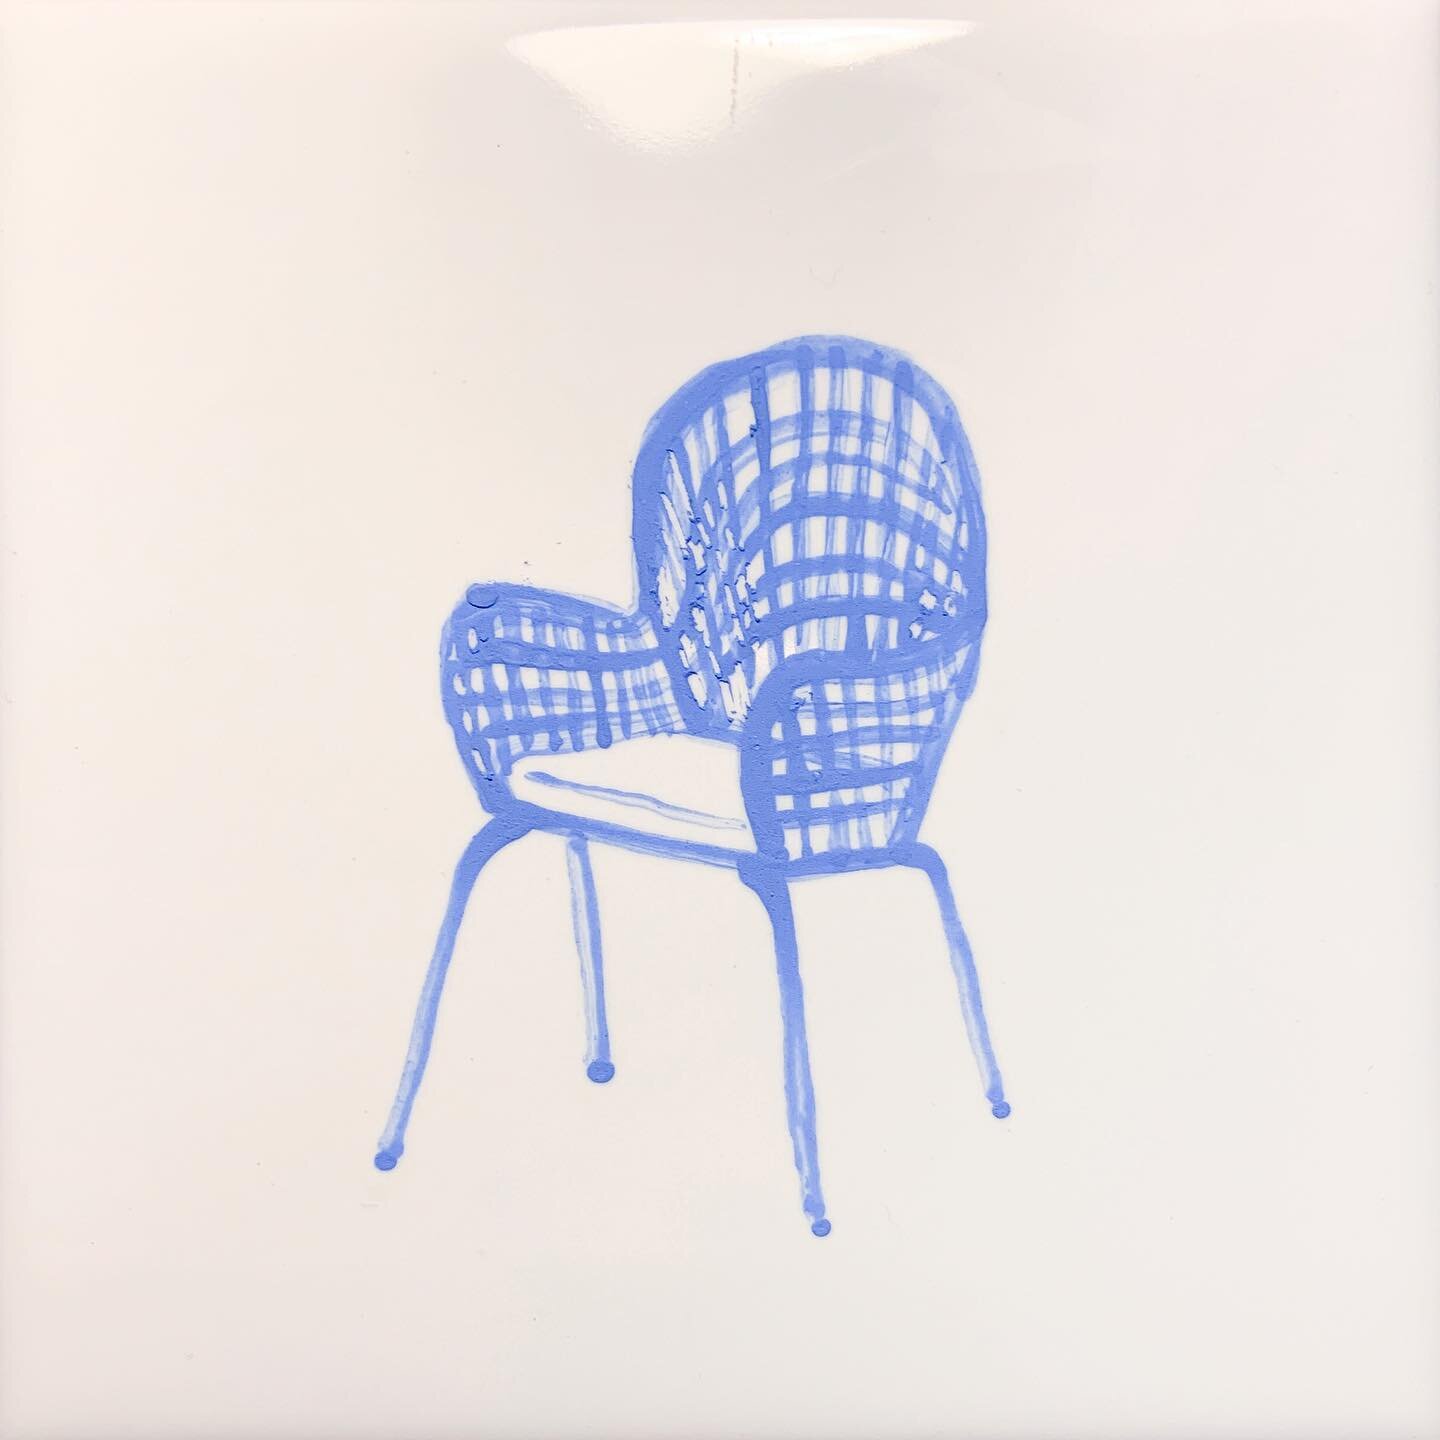 bought a new house and all my daydreams are about chairs; day 76/100 for #100iubfa 

#illustrationartists #delftblue #delftware #designer #graphicdesign #oneaday